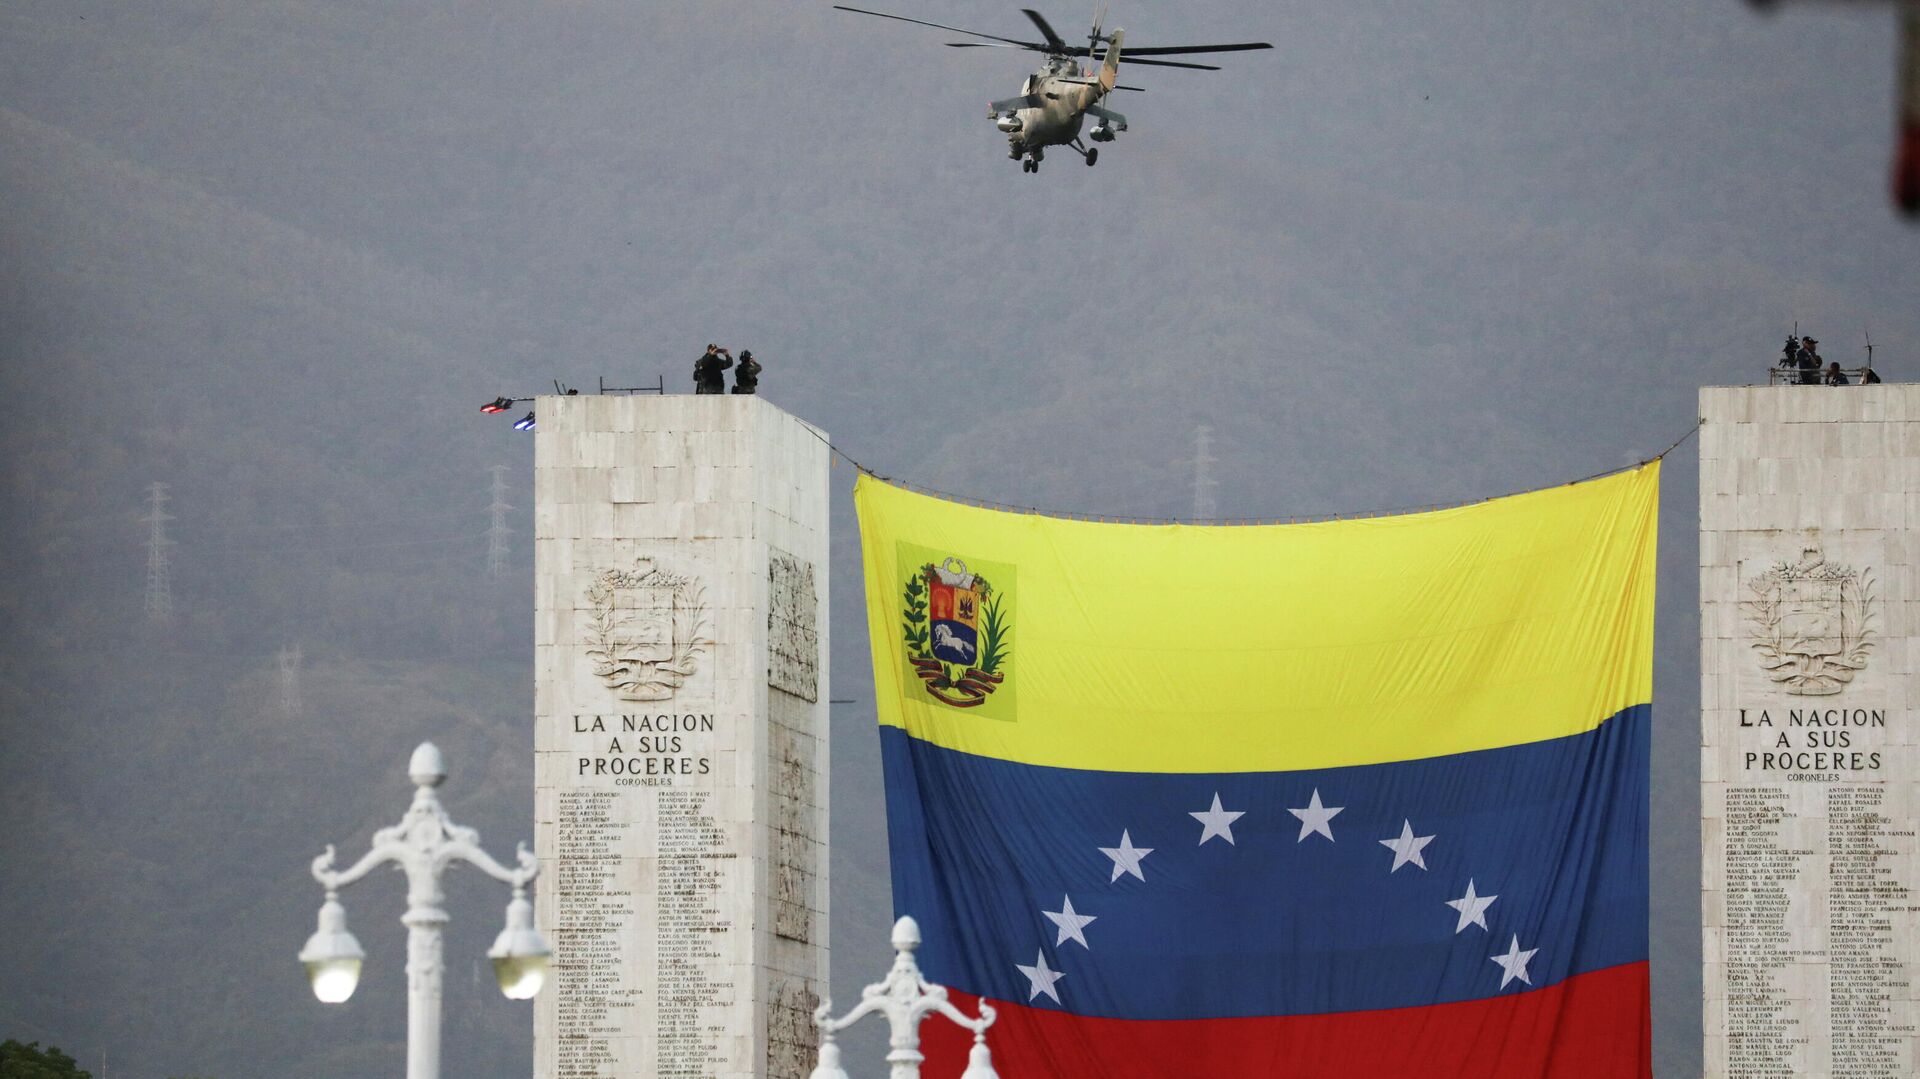 A helicopter flies over a large Venezuelan flag during a military parade to celebrate the 210th anniversary of Venezuela's independence in Caracas, Venezuela, July 5, 2021. - Sputnik International, 1920, 09.03.2022